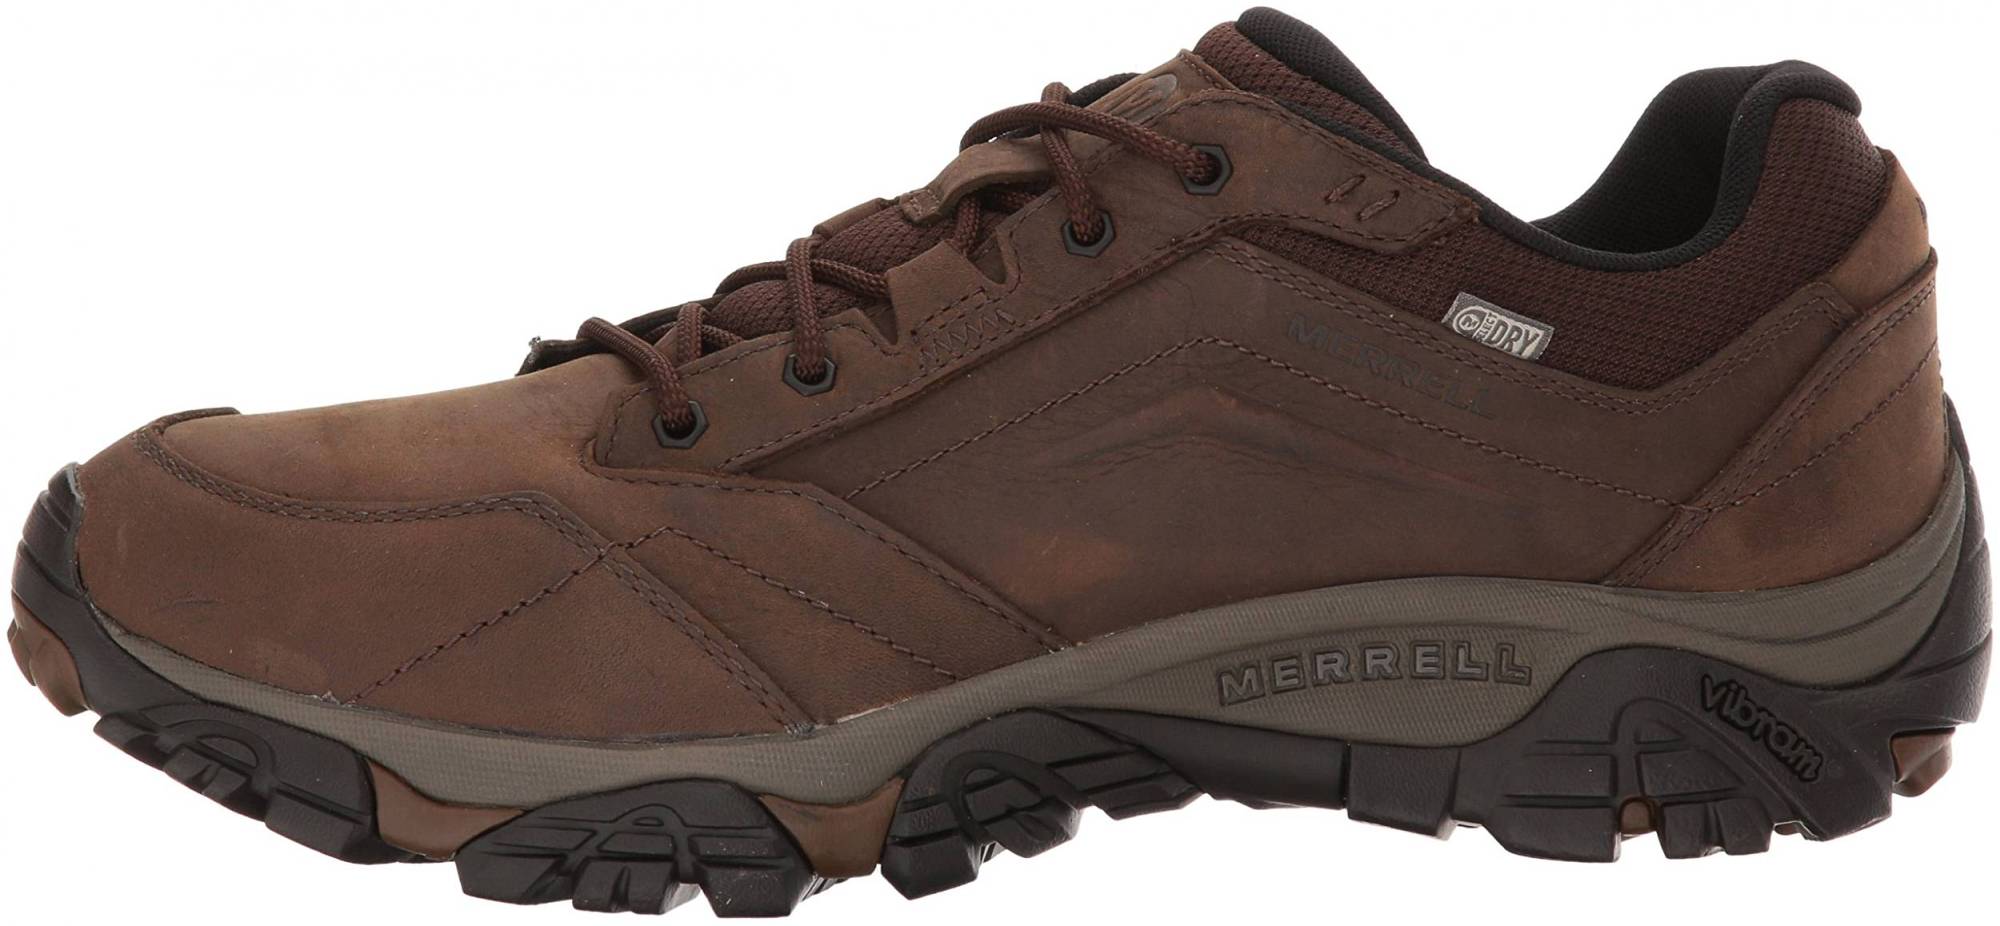 Merrell Moab Adventure Lace Waterproof – Shoes Reviews & Reasons To Buy